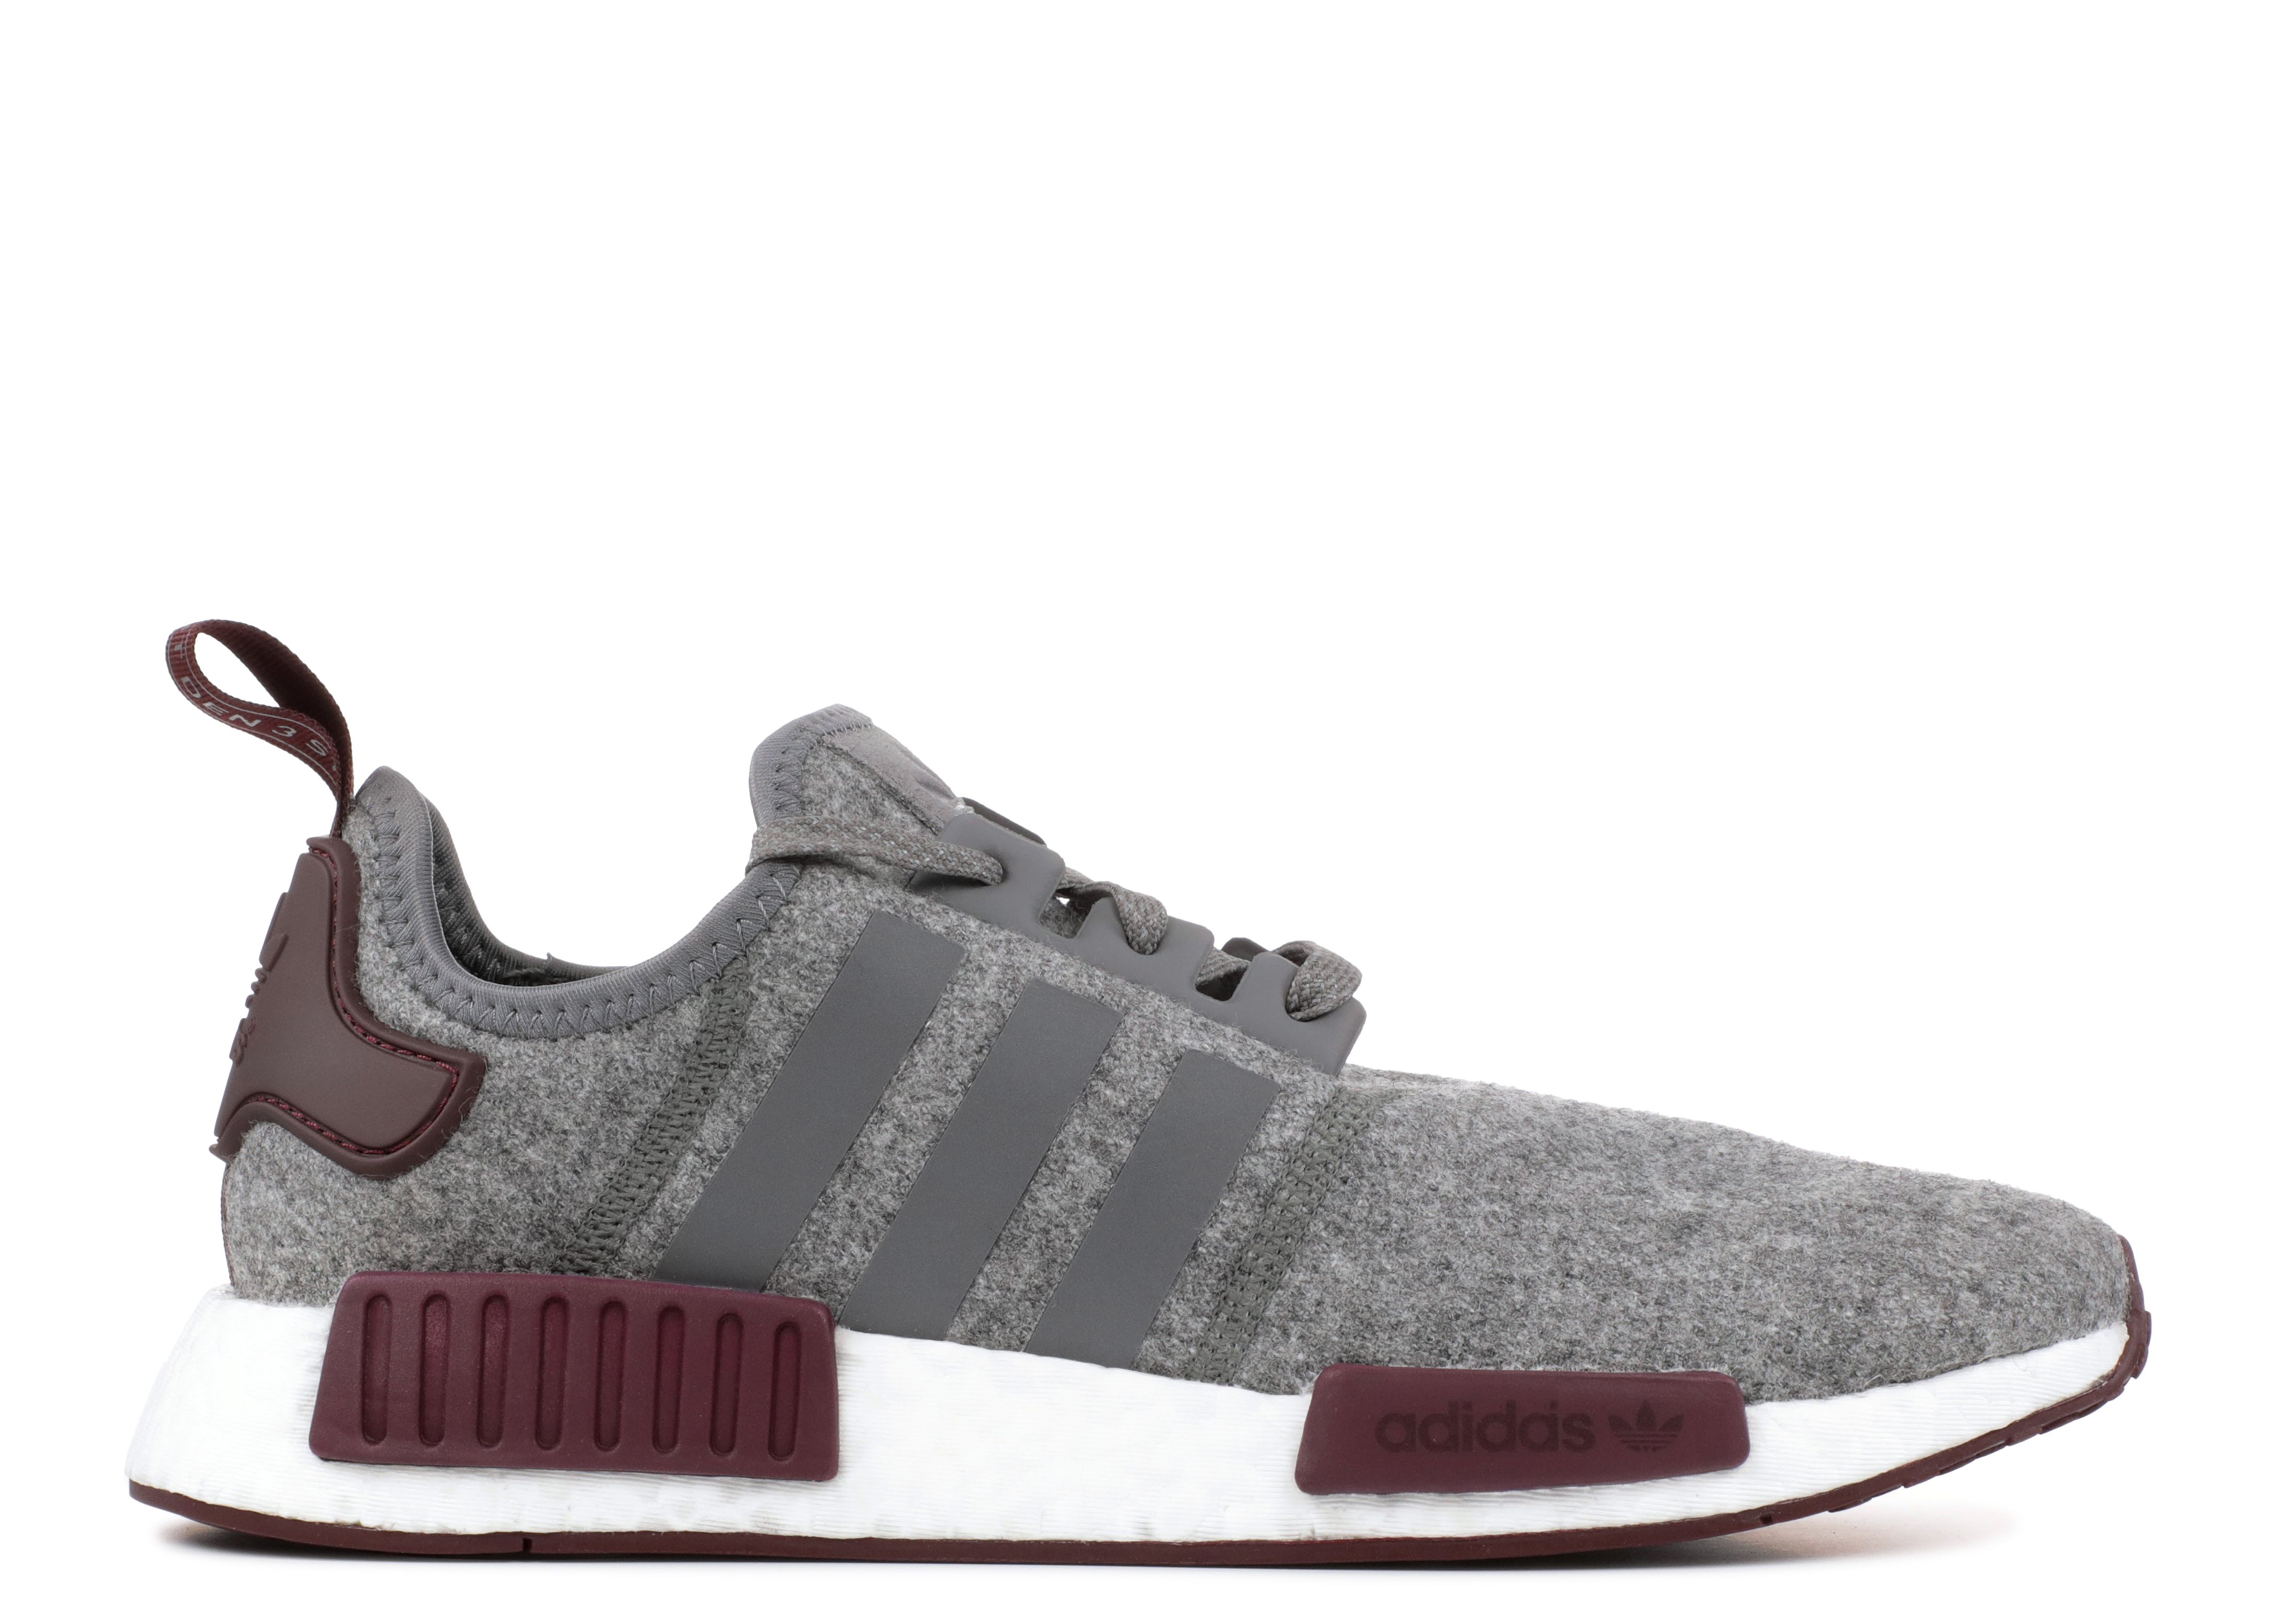 nmd r1 maroon cheap online